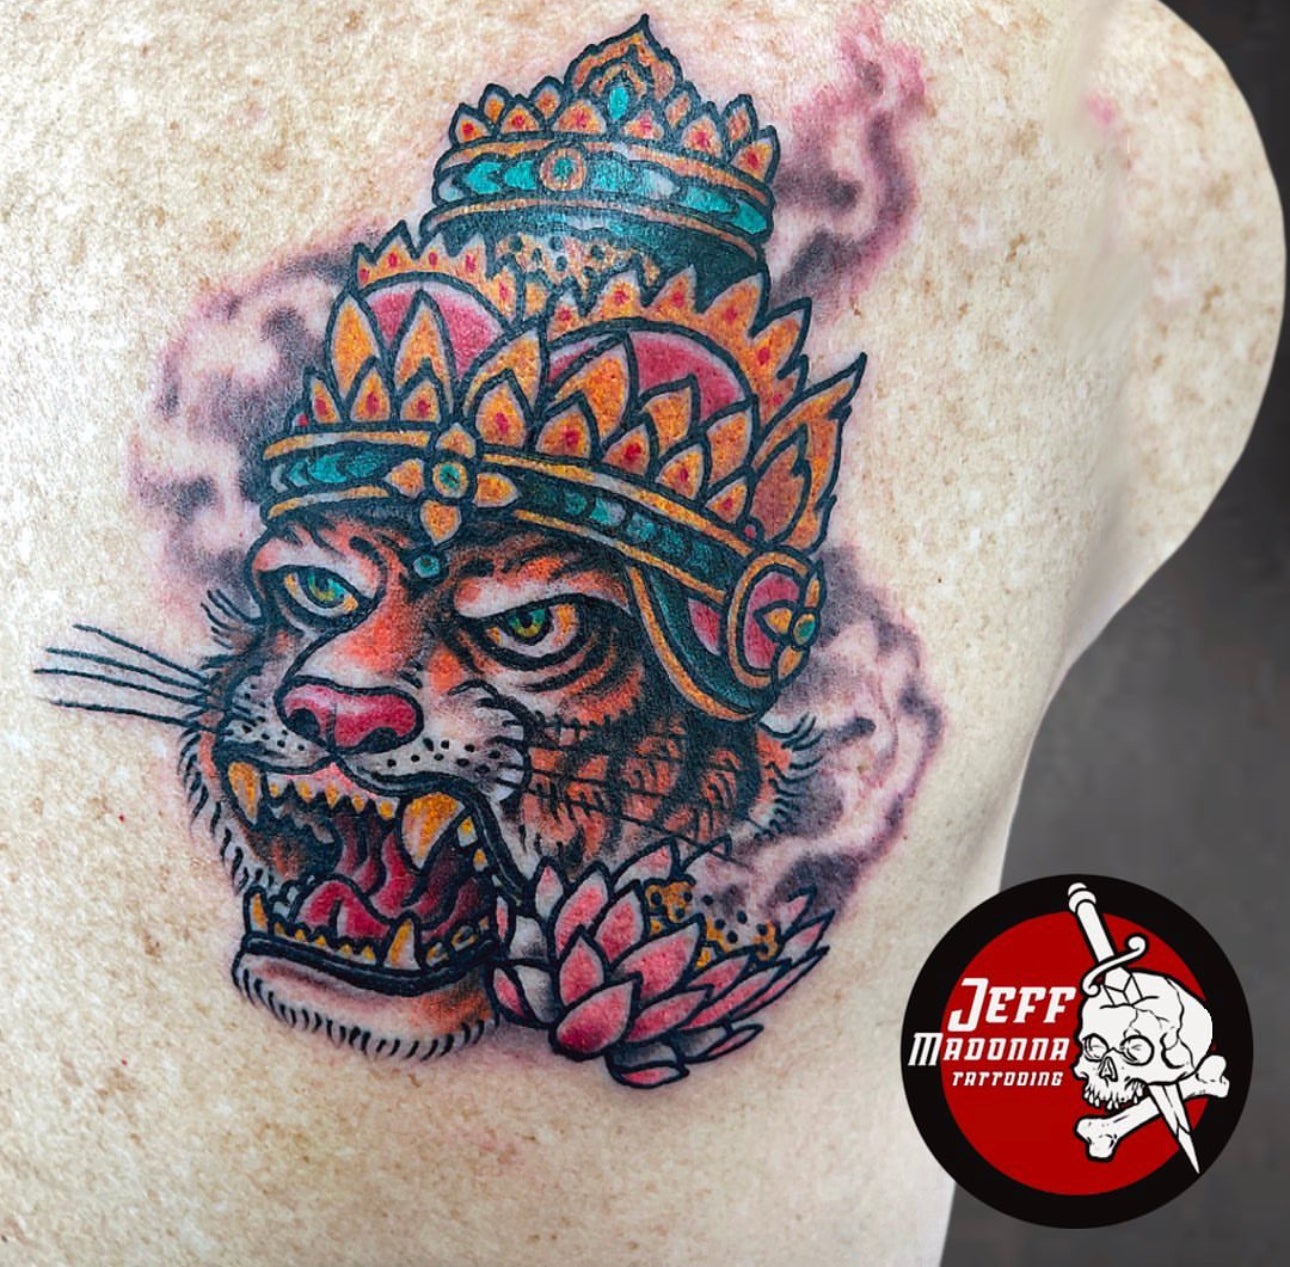 Tattoo uploaded by OUCH (Tattoo & Piercing) • Narasimha tattoo at OUCH For  bookings call 7382521886, 9848597806. • Tattoodo